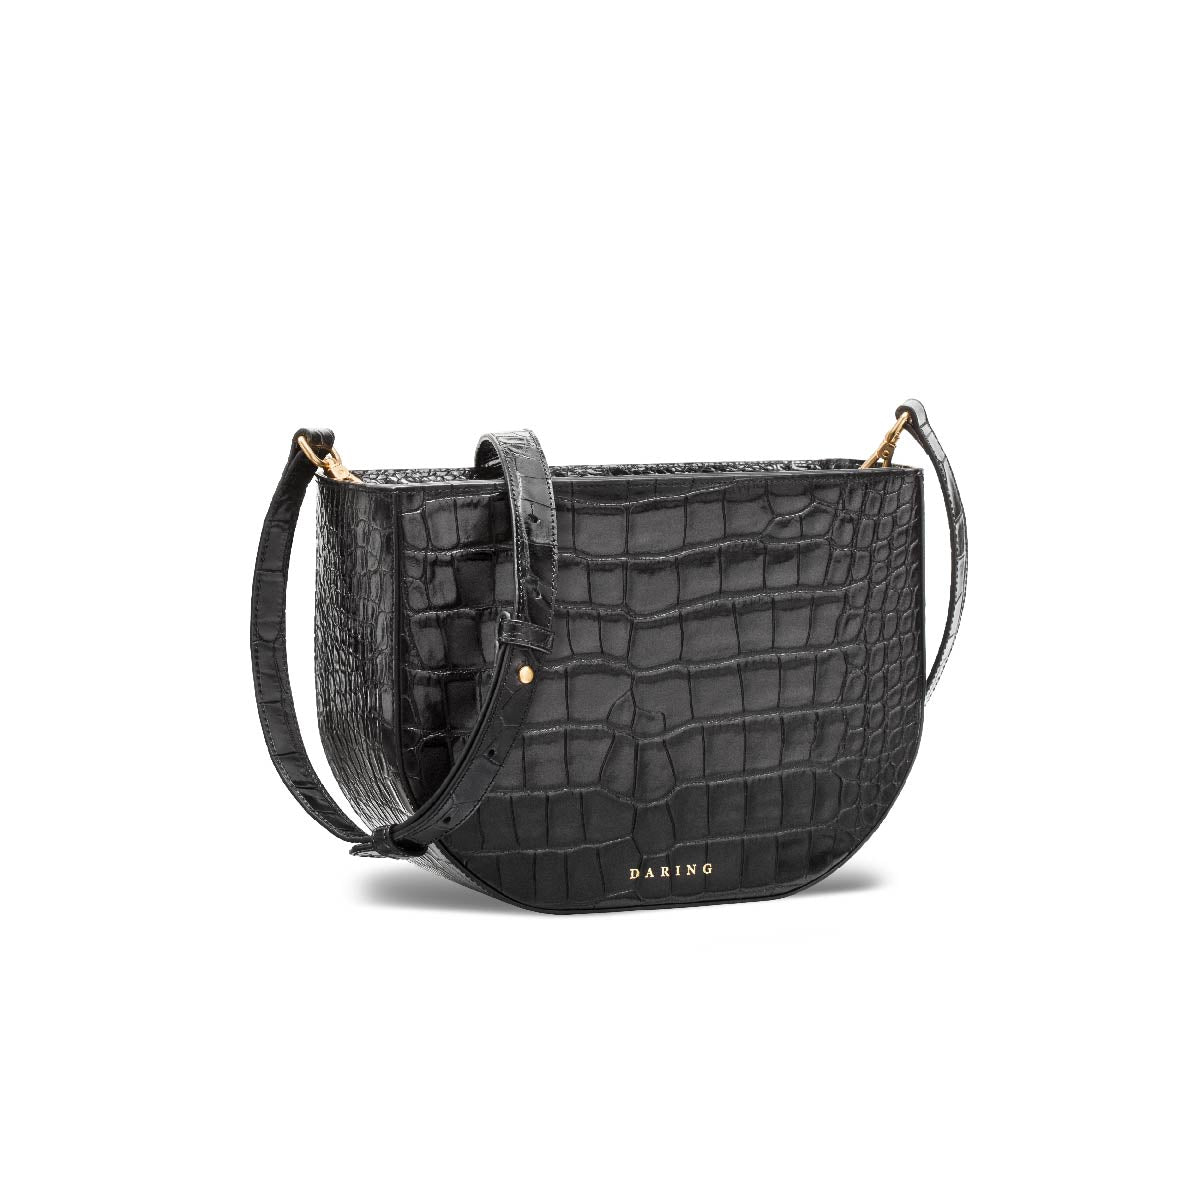 The Crossbody Bag in Black, with adjustable strap, three quarter view.